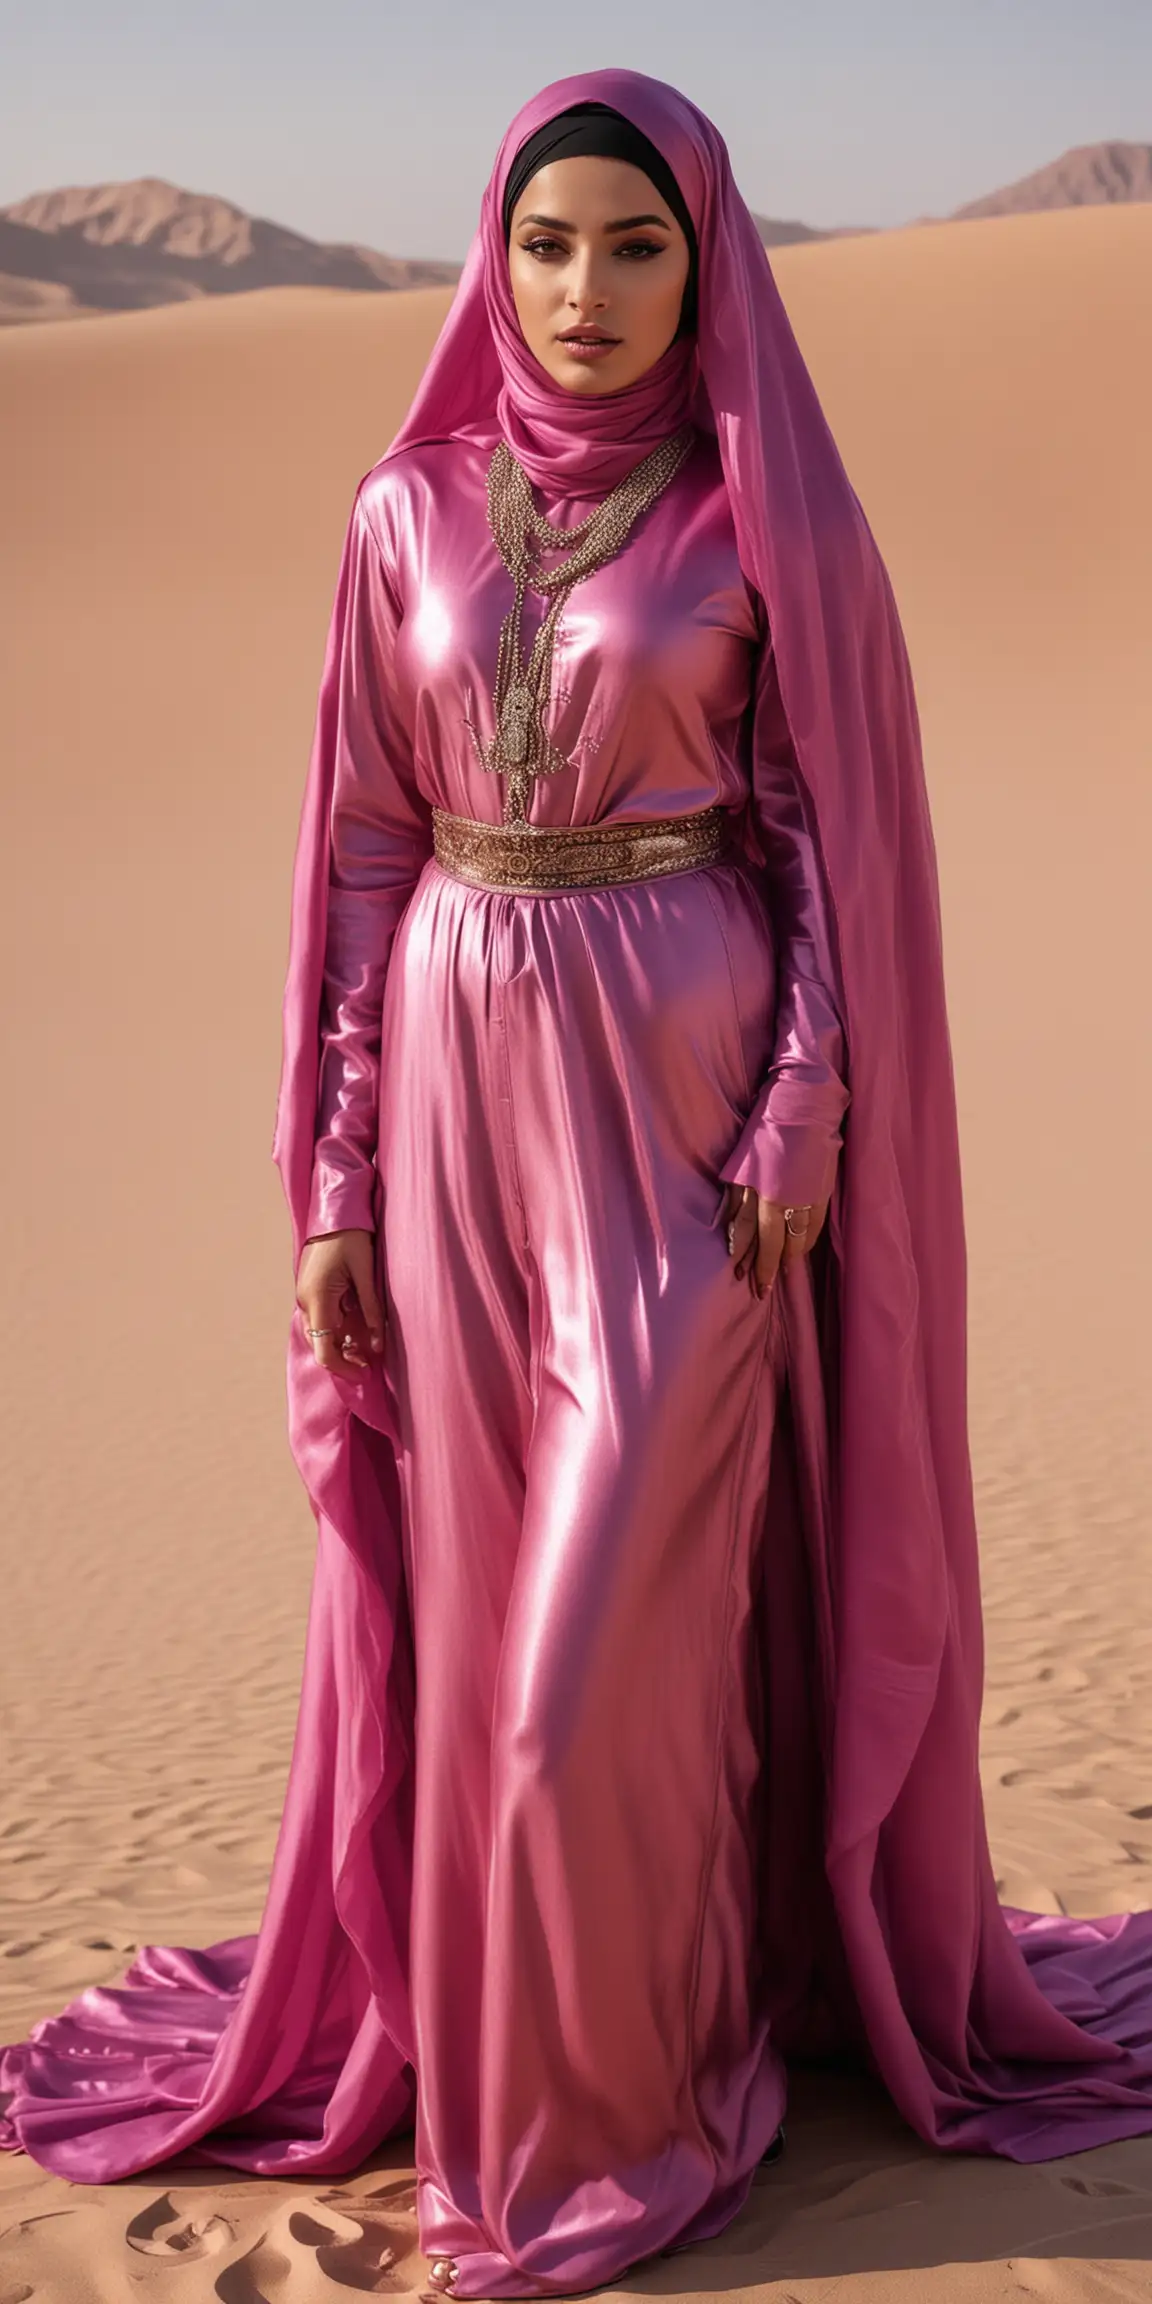 Remote luxury desert oasis. Newlywed, Fair-skinned, shy, big-breasted Niqabi Arab Muslimah in heavy gaudy bridal lipstick makeup & jewellery and 5” patent leather Louboutin heels is wearing a magenta shiny lustrous metallic silk chiffon billowing pants with a metallic niqab long, loose, drapey fabric *hides her face*.